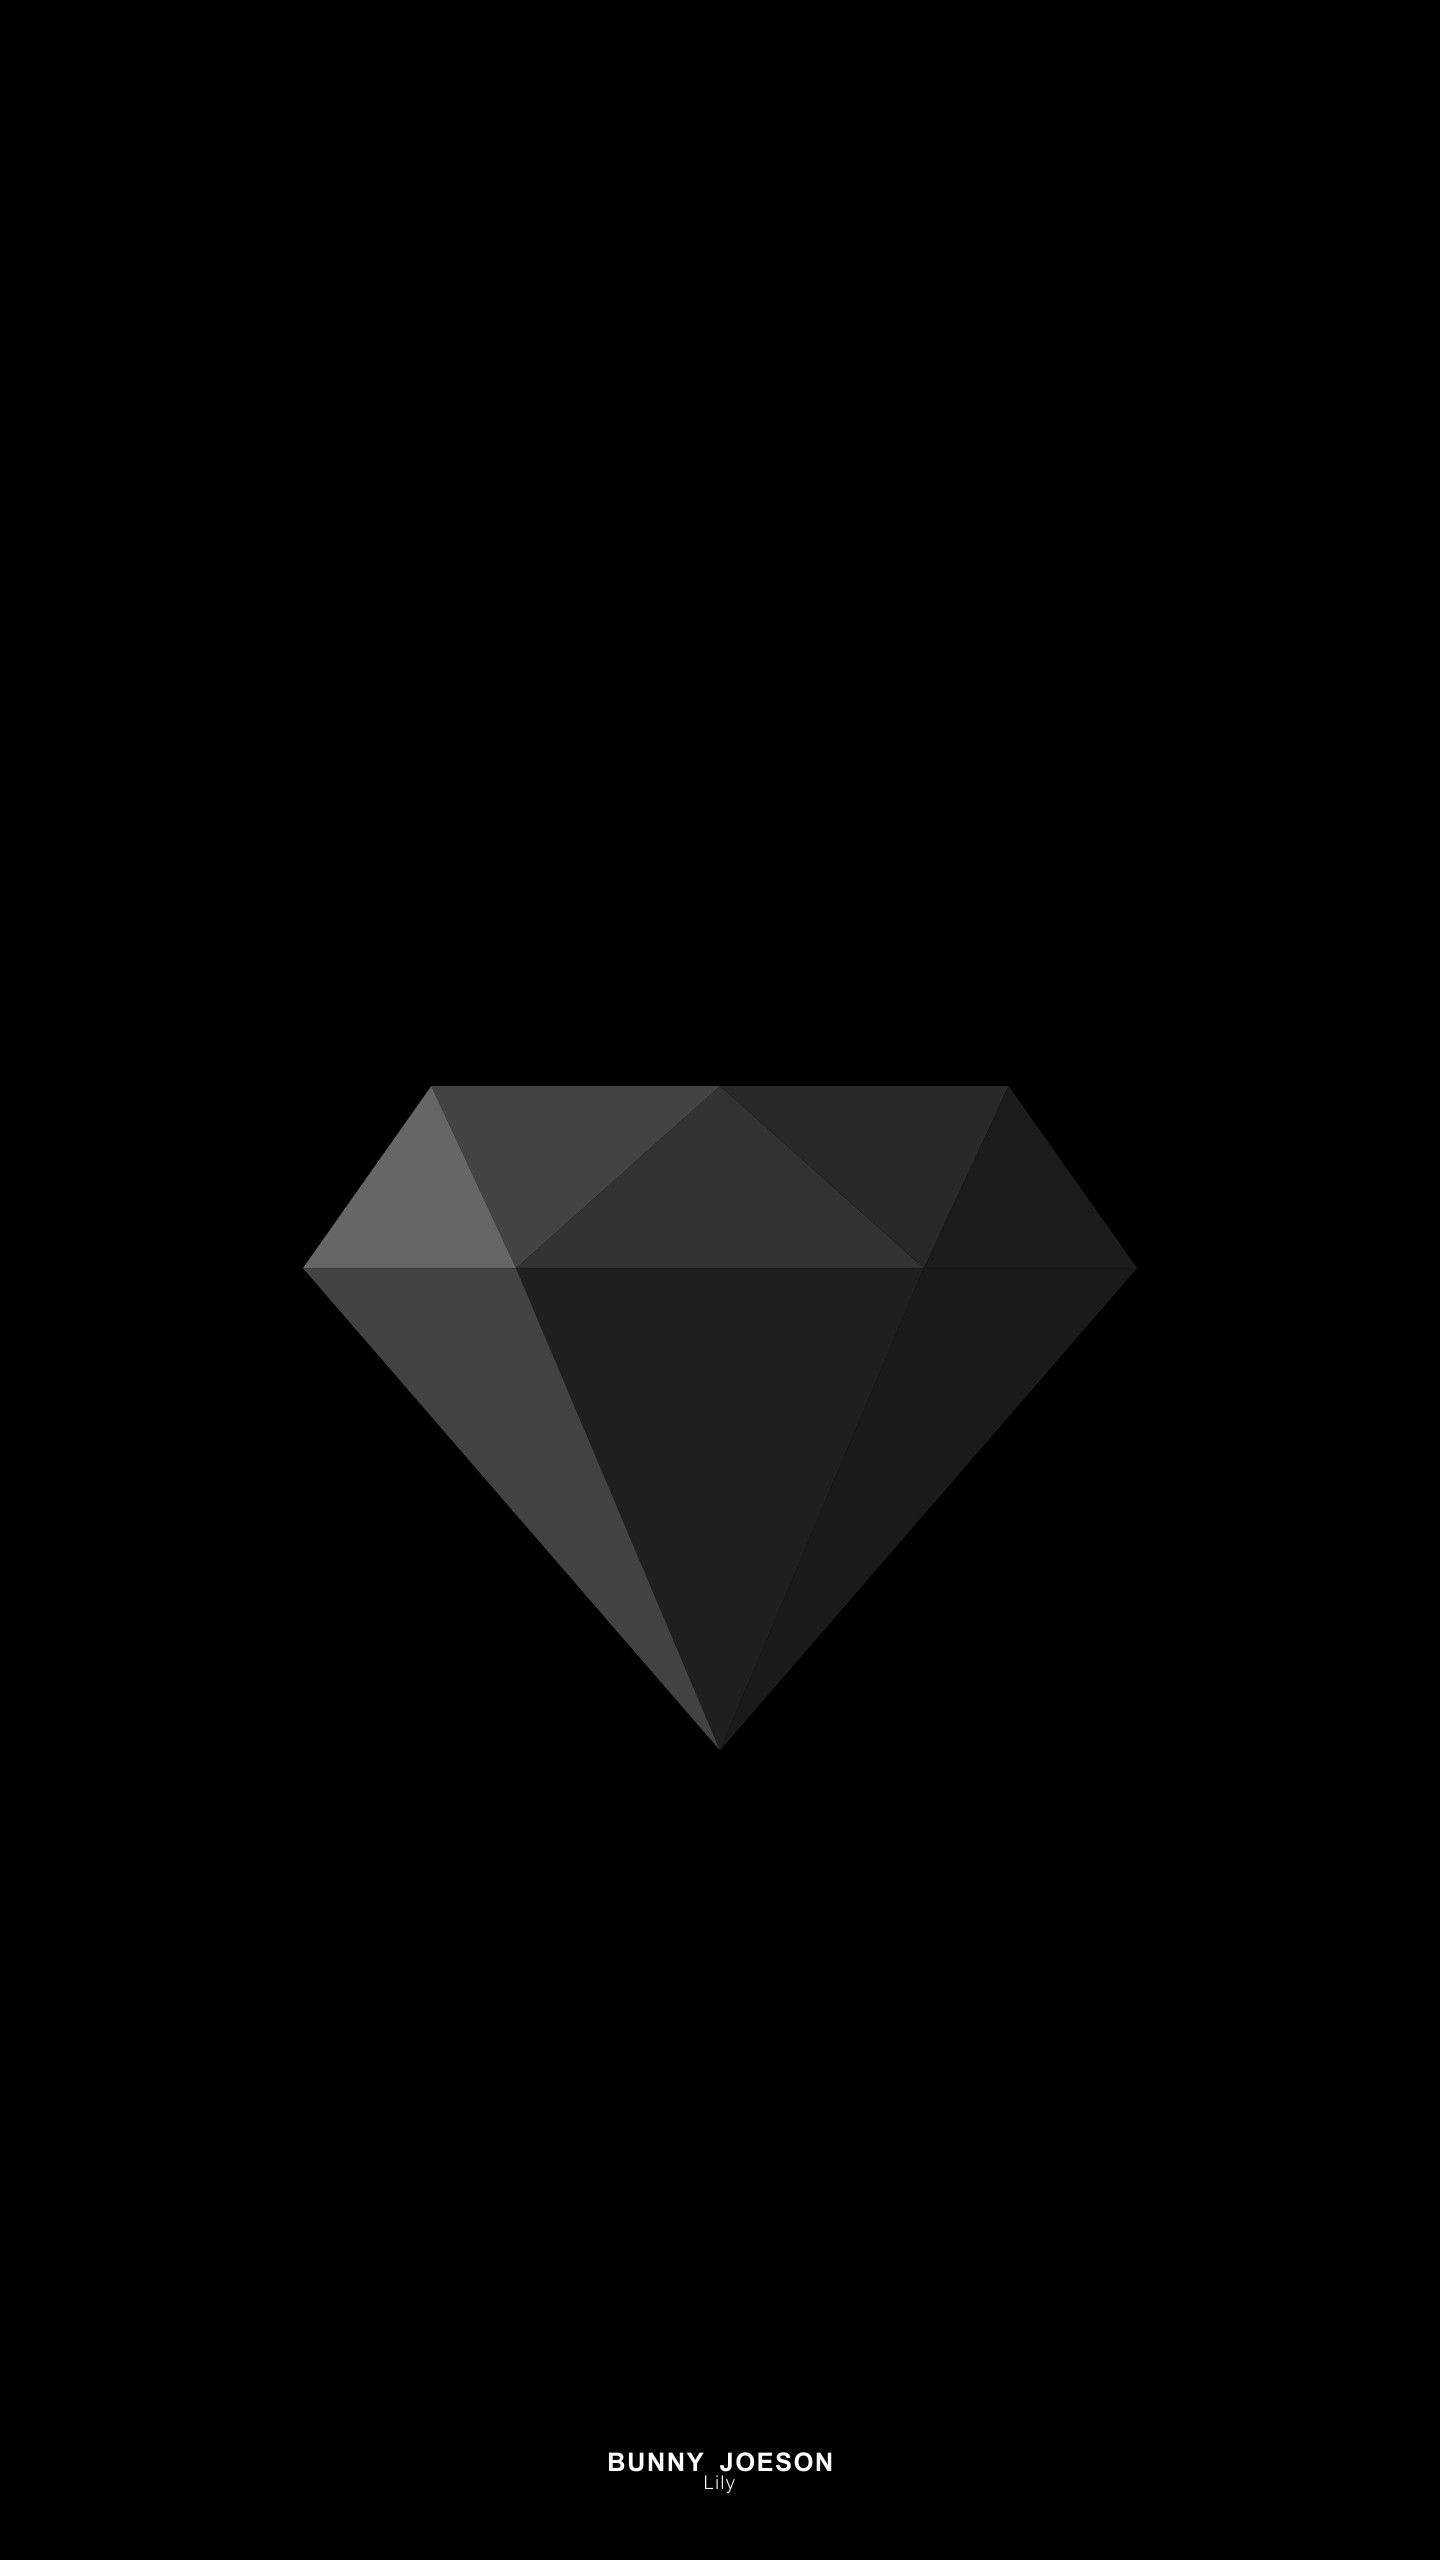 Black And White Diamond Wallpapers